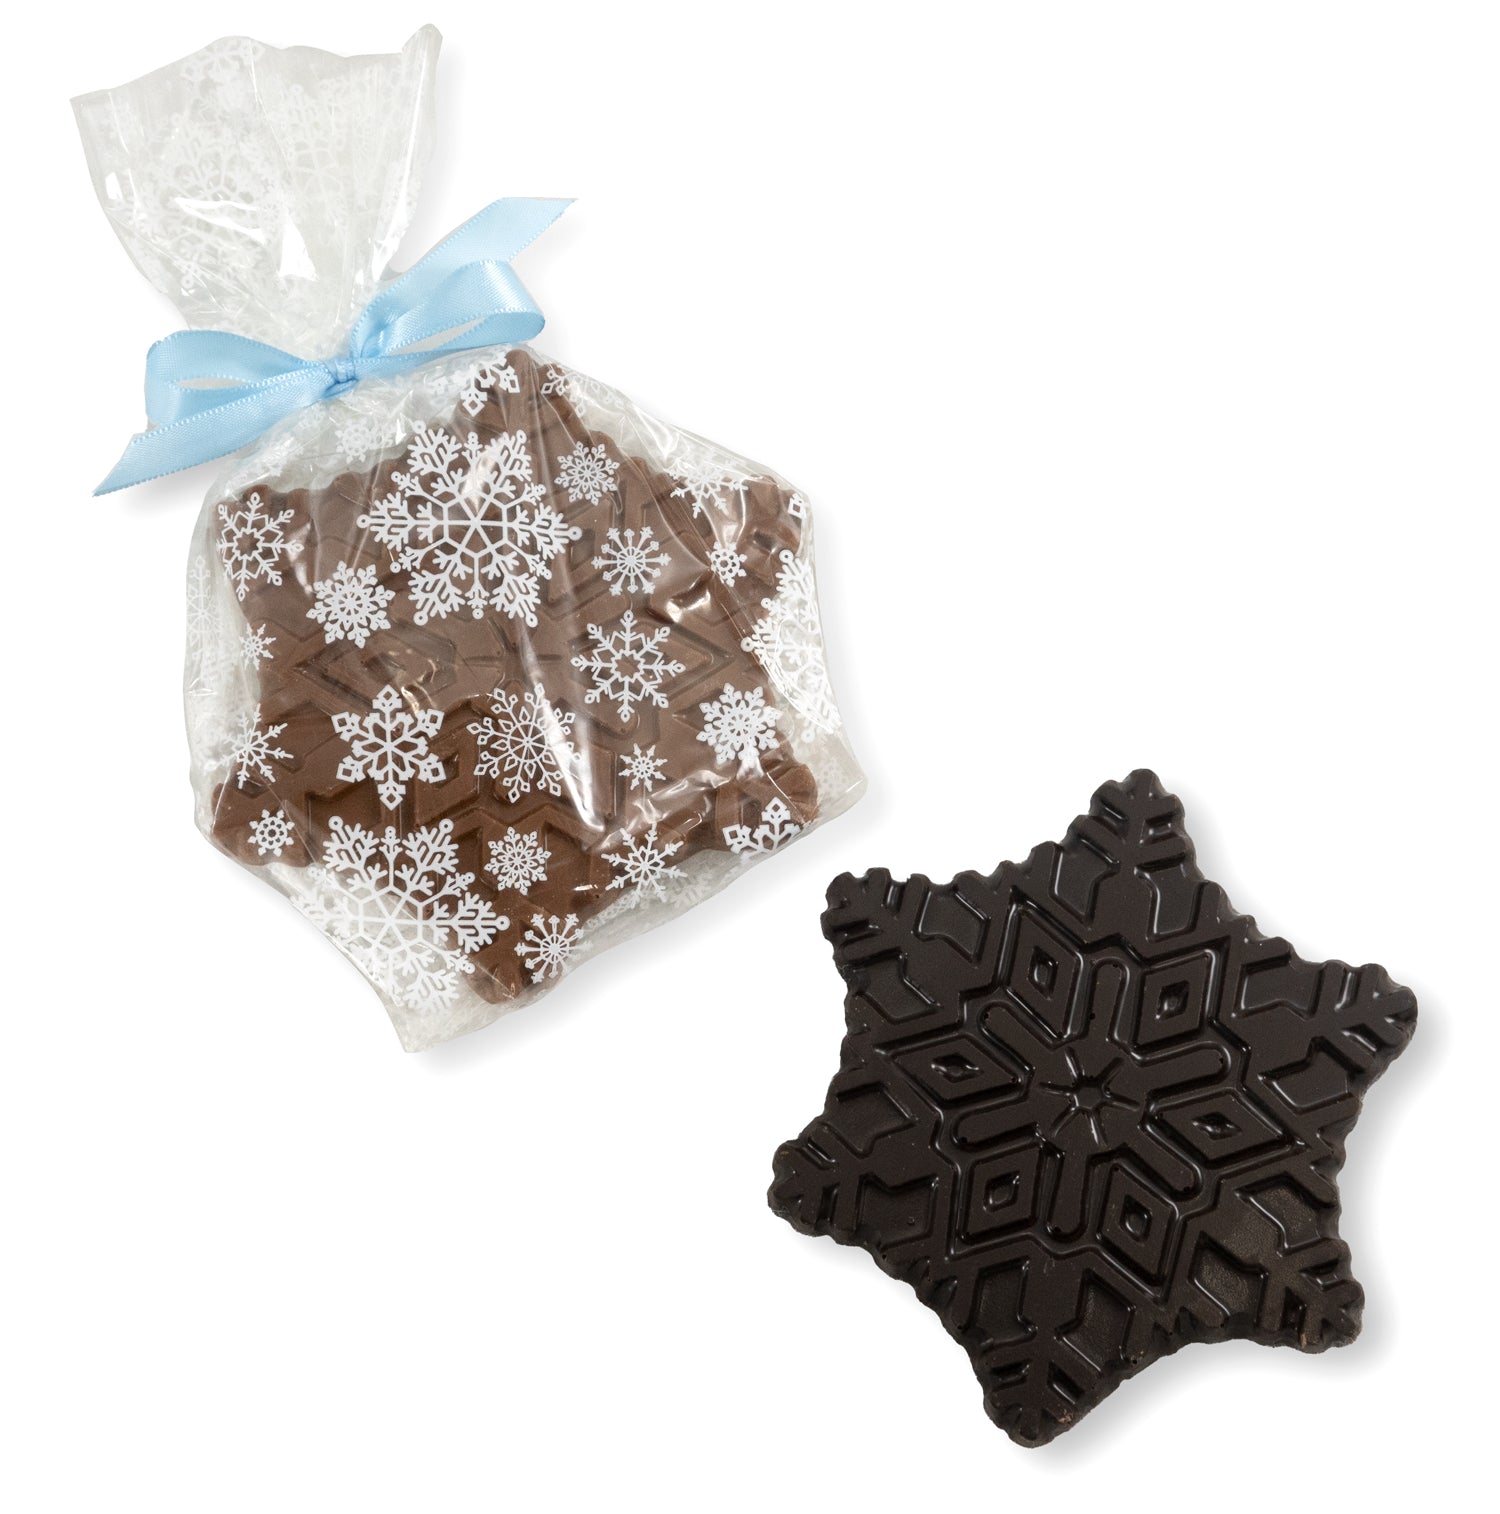 Solid chocolate snowflake in festive packaging with a bow